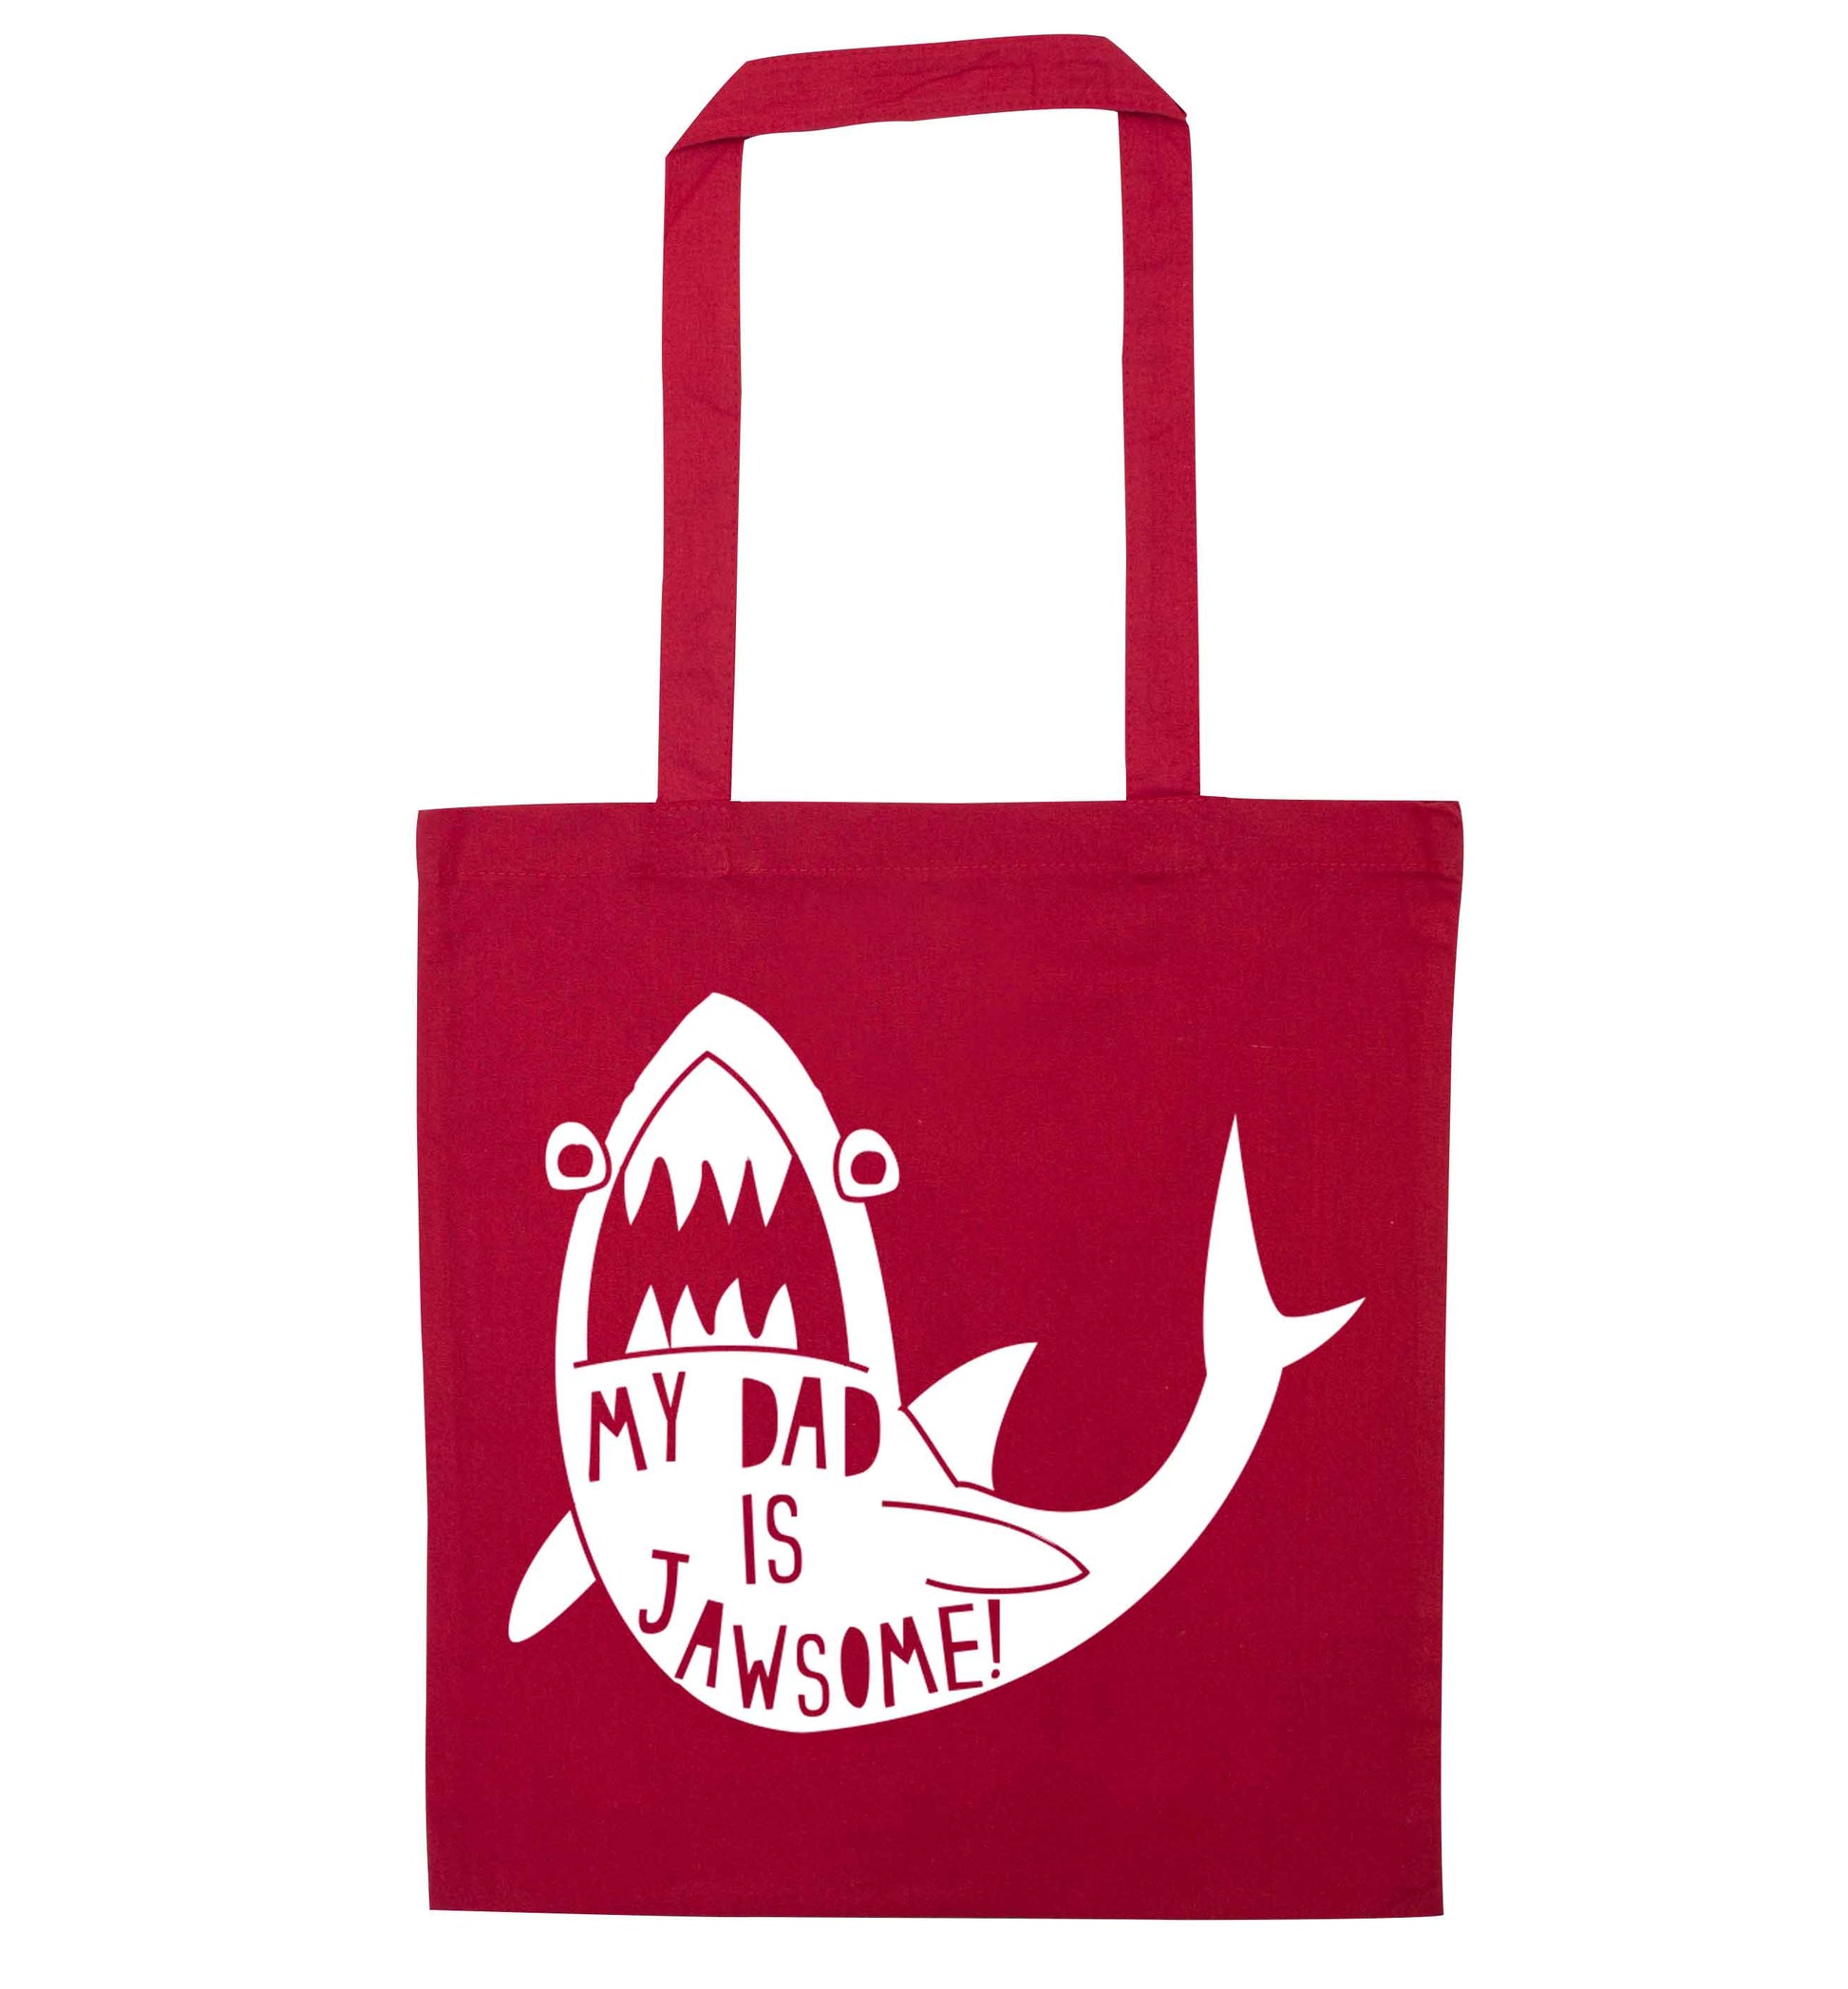 My Dad is jawsome red tote bag